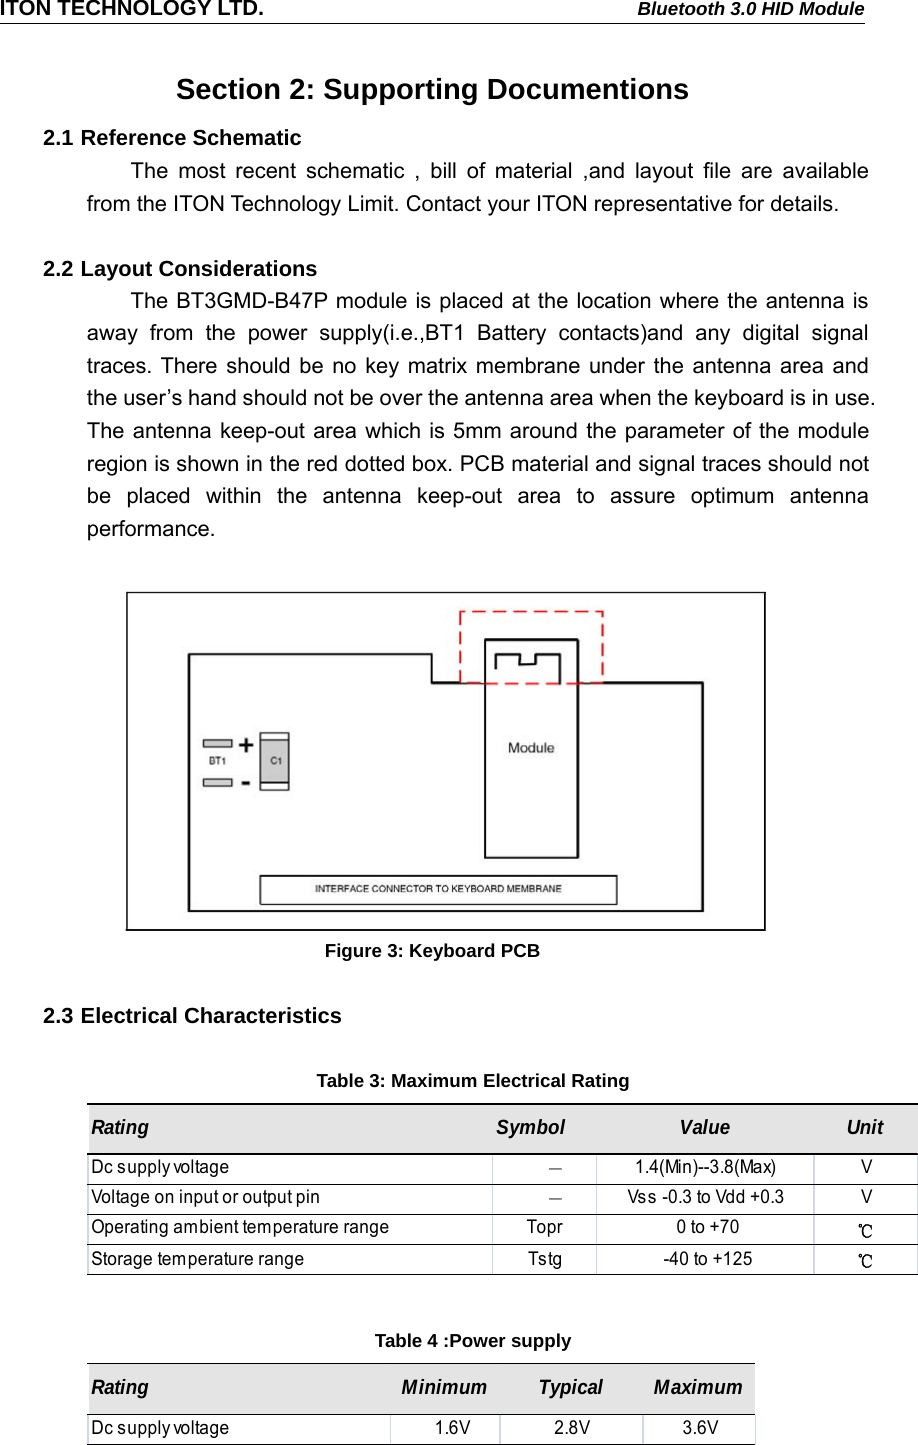 ITON TECHNOLOGY LTD. Bluetooth 3.0 HID ModuleSection 2: Supporting Documentions2.1 Reference SchematicThe most recent schematic , bill of material ,and layout file are availablefrom the ITON Technology Limit. Contact your ITON representative for details.2.2 Layout ConsiderationsThe BT3GMD-B47P module is placed at the location where the antenna isaway from the power supply(i.e.,BT1 Battery contacts)and any digital signaltraces. There should be no key matrix membrane under the antenna area andthe user’s hand should not be over the antenna area when the keyboard is in use.The antenna keep-out area which is 5mm around the parameter of the moduleregion is shown in the red dotted box. PCB material and signal traces should notbe placed within the antenna keep-out area to assure optimum antennaperformance.Figure 3: Keyboard PCB2.3 Electrical CharacteristicsTable 3: Maximum Electrical RatingTable 4 :Power supplyRating Symbol Value UnitDc supply voltage      －1.4(Min)--3.8(Max) VVoltage on input or output pin      －Vs s  -0.3 to Vdd +0.3 VOperating ambient temperature range Topr  0 to +70 ℃Storage temperature range Tstg  -40 to +125 ℃Rating Minimum Typical MaximumDc supply voltage    1.6V 2.8V 3.6V